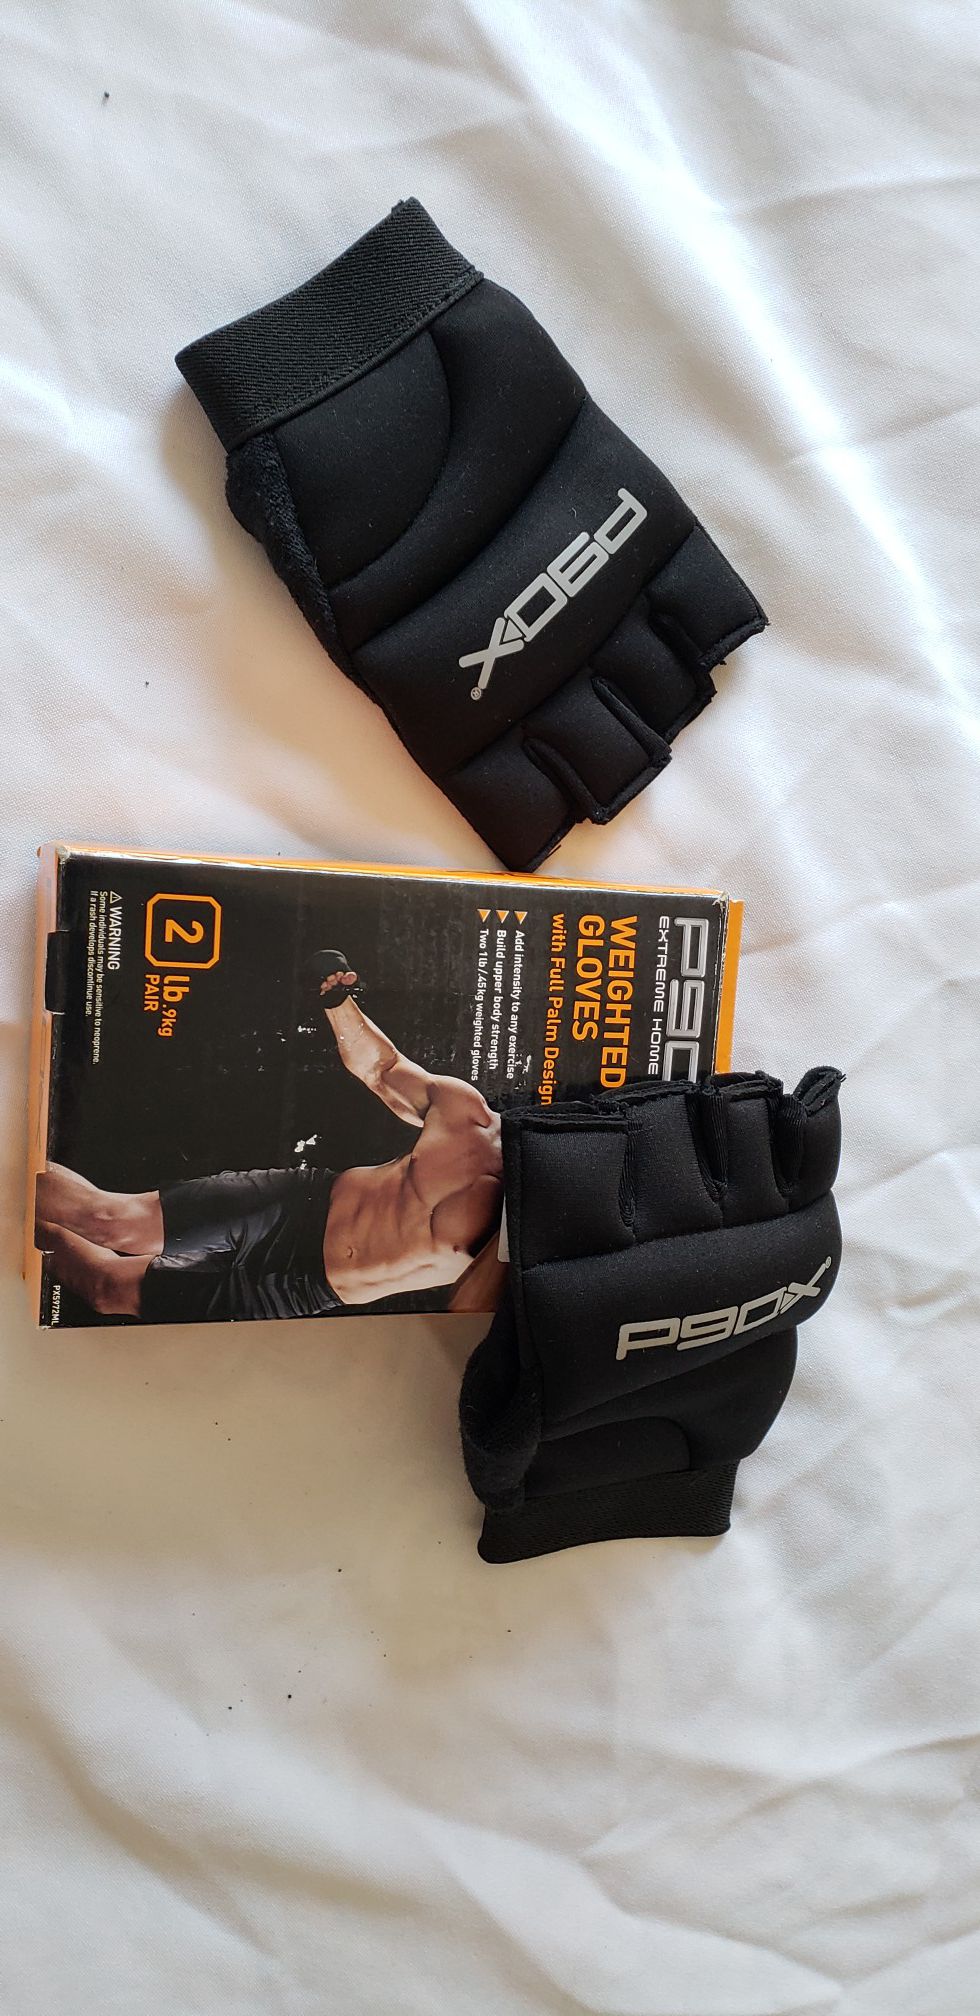 P90X Weighted Gloves